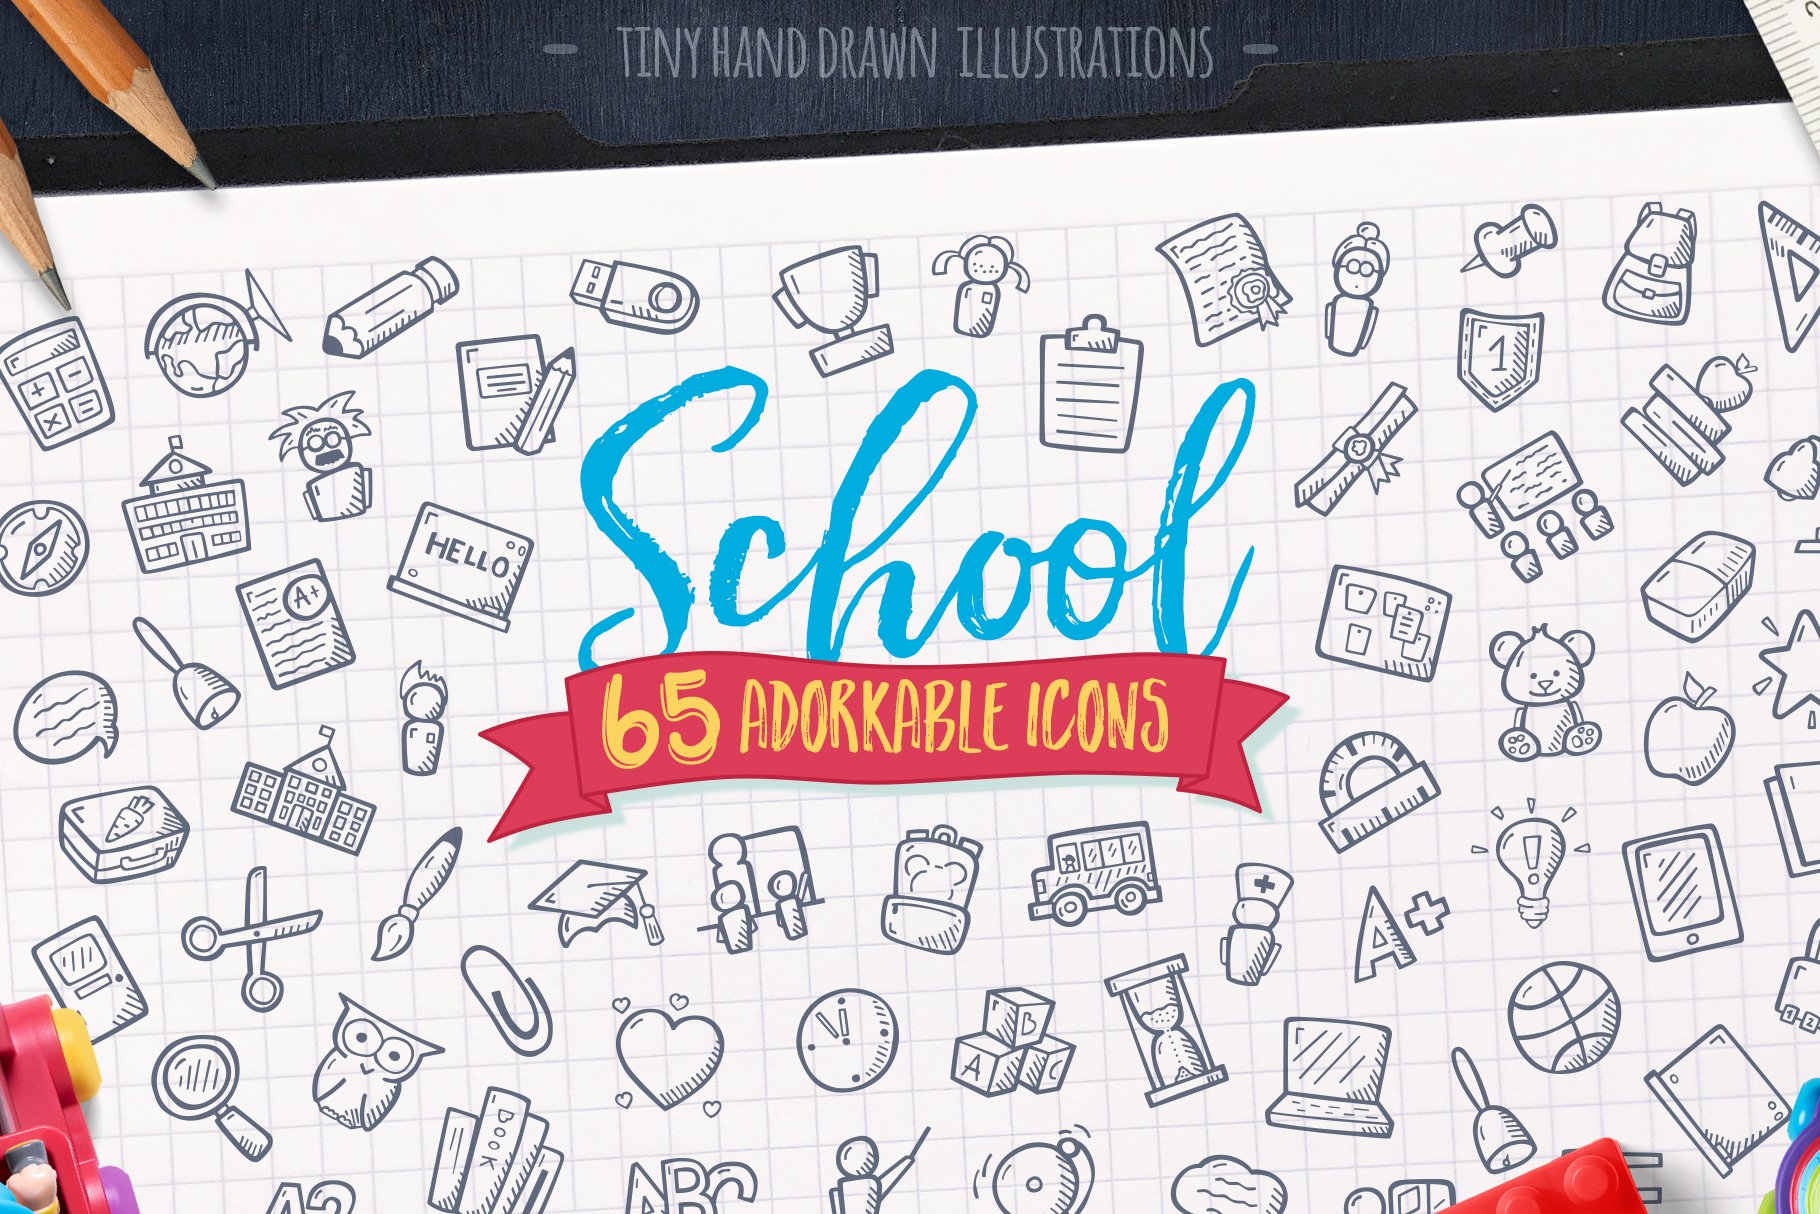 School - Hand Drawn Icons cover image.